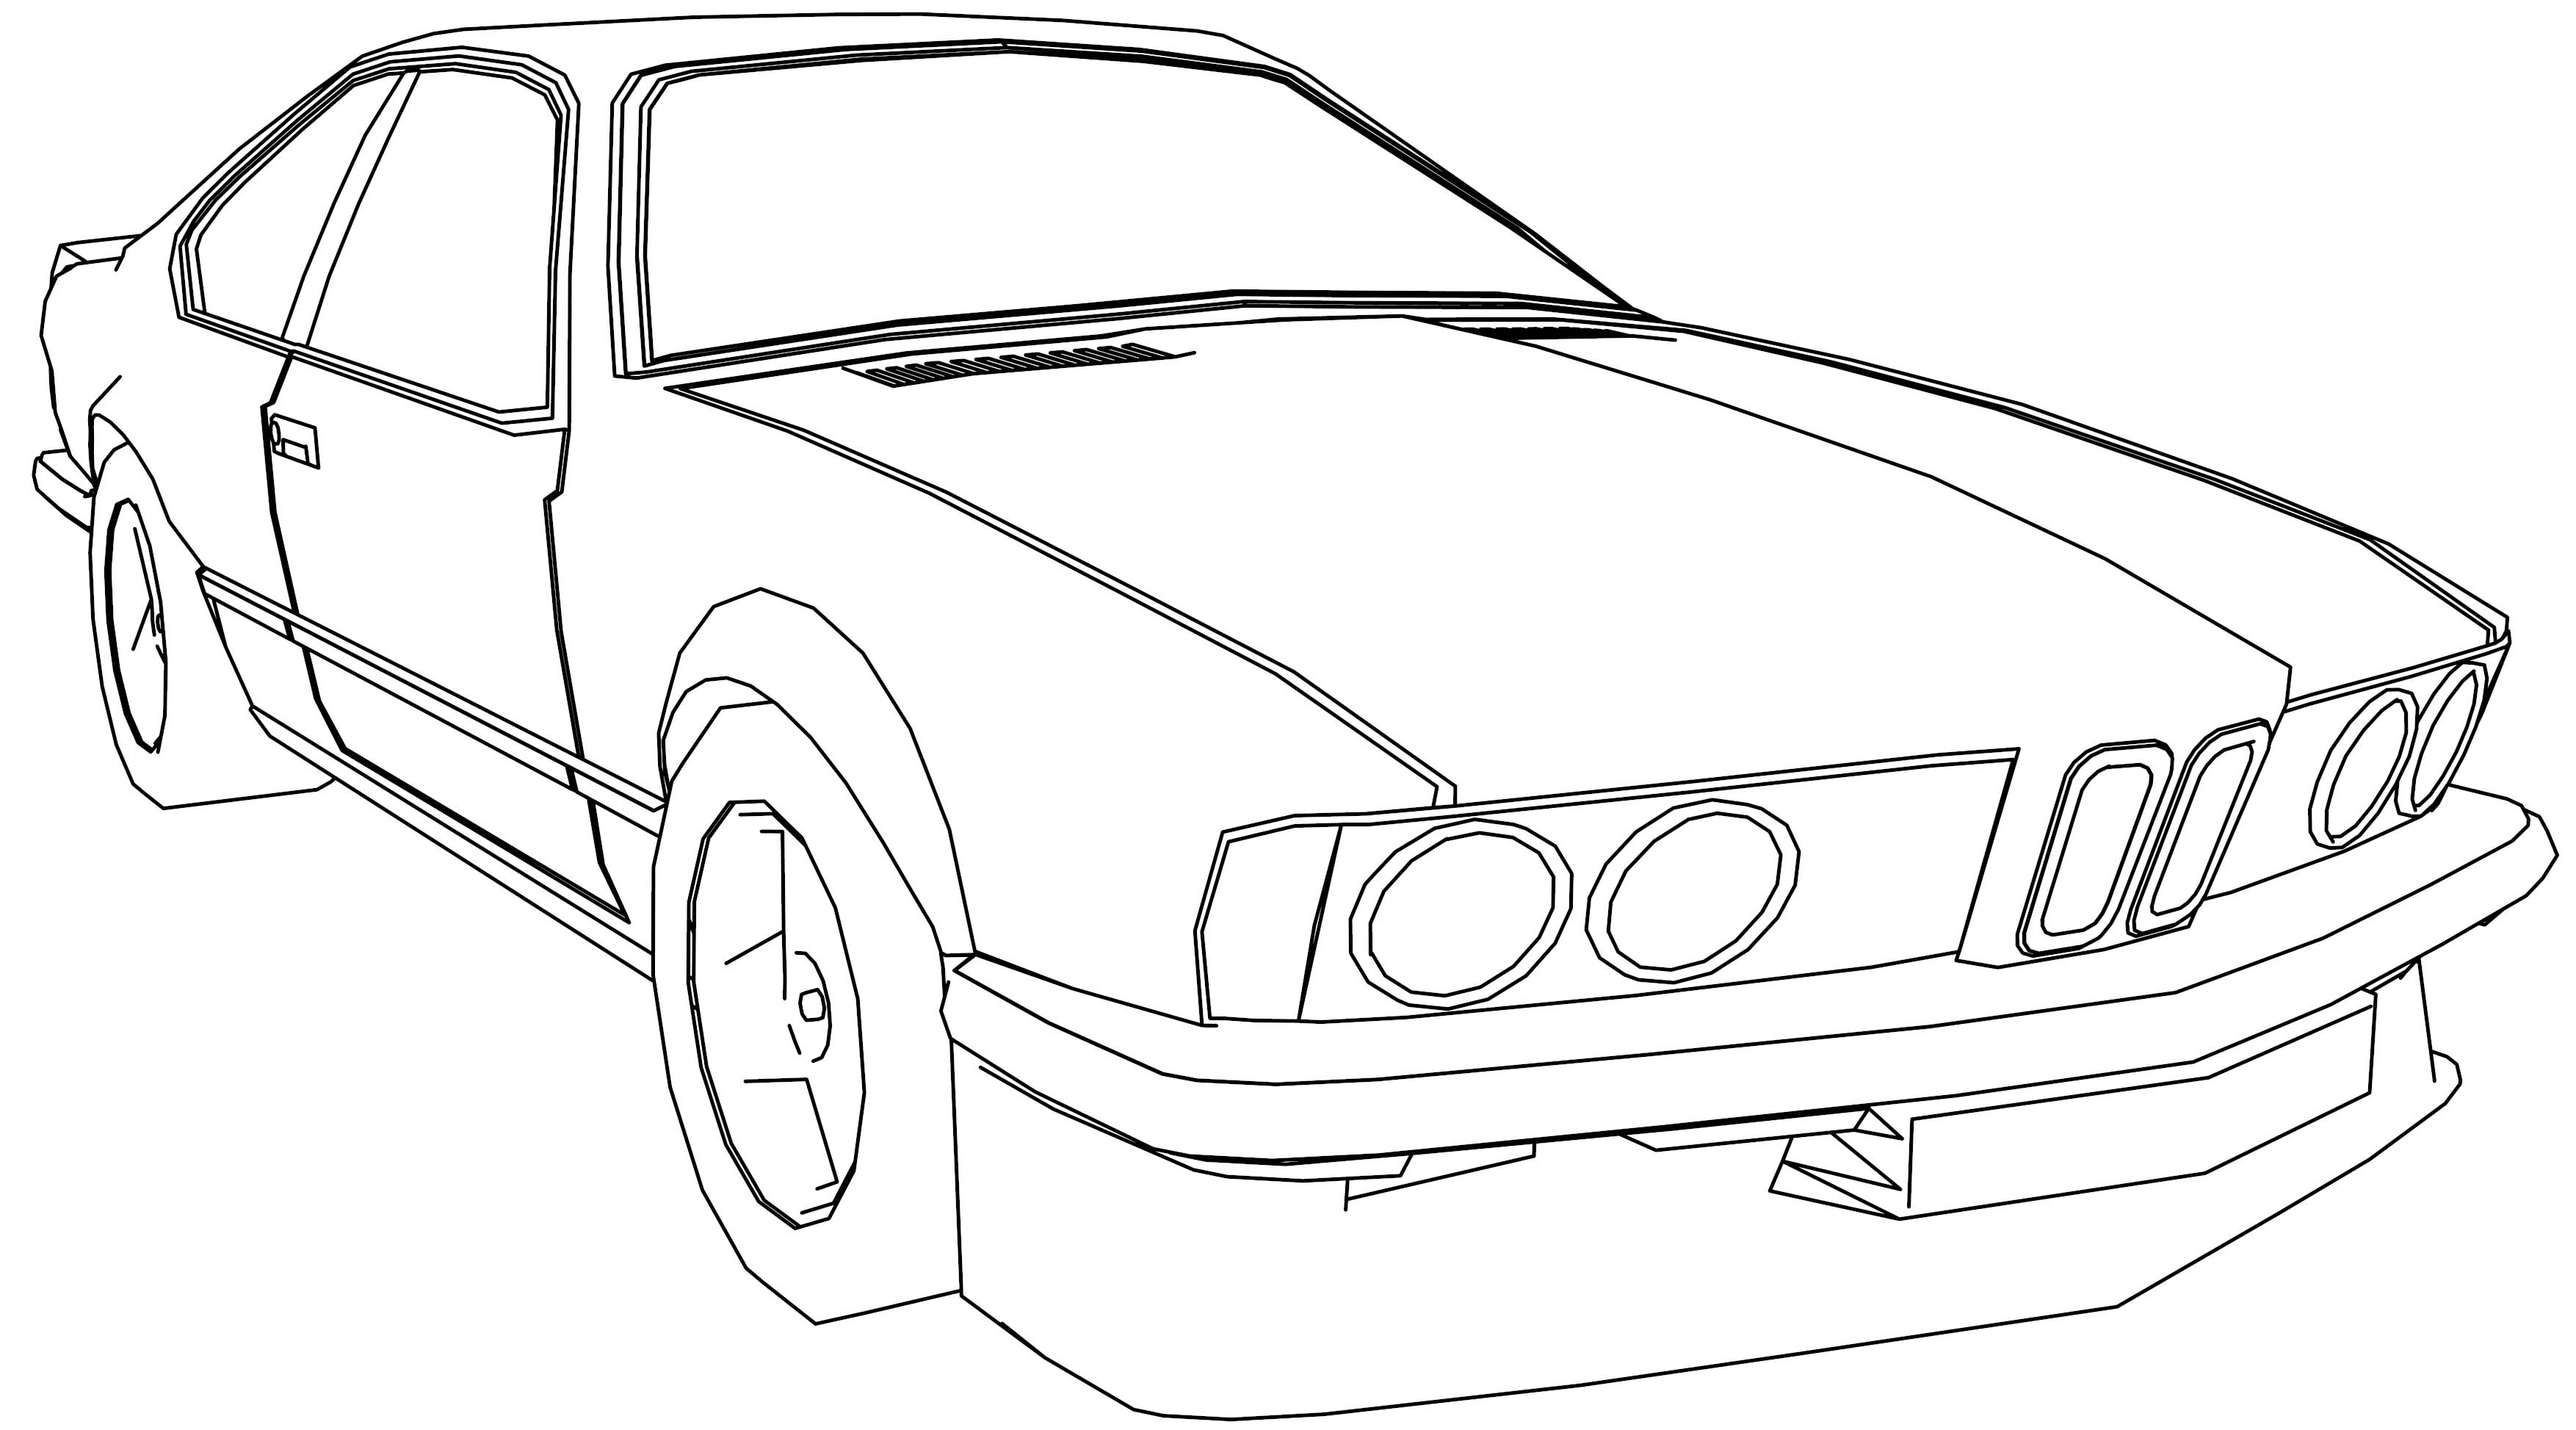 Download 297+ Bmw S Coloring Pages PNG PDF File - Best Free Mockups